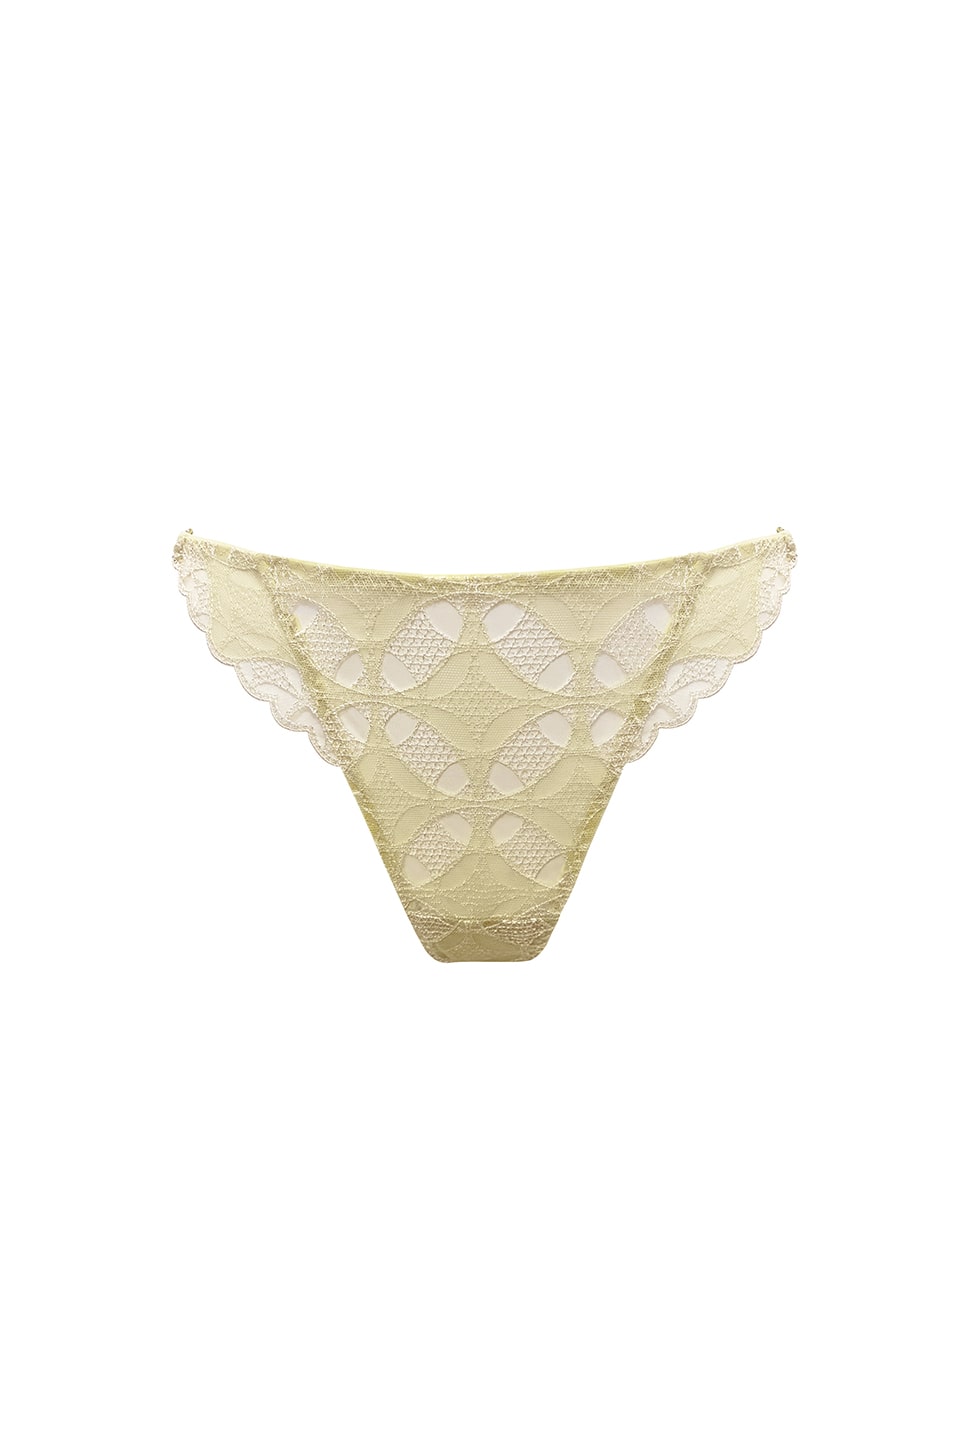 Shop online trendy Yellow Undergarments from Atelier Bordelle Fashion designer. Product gallery 1